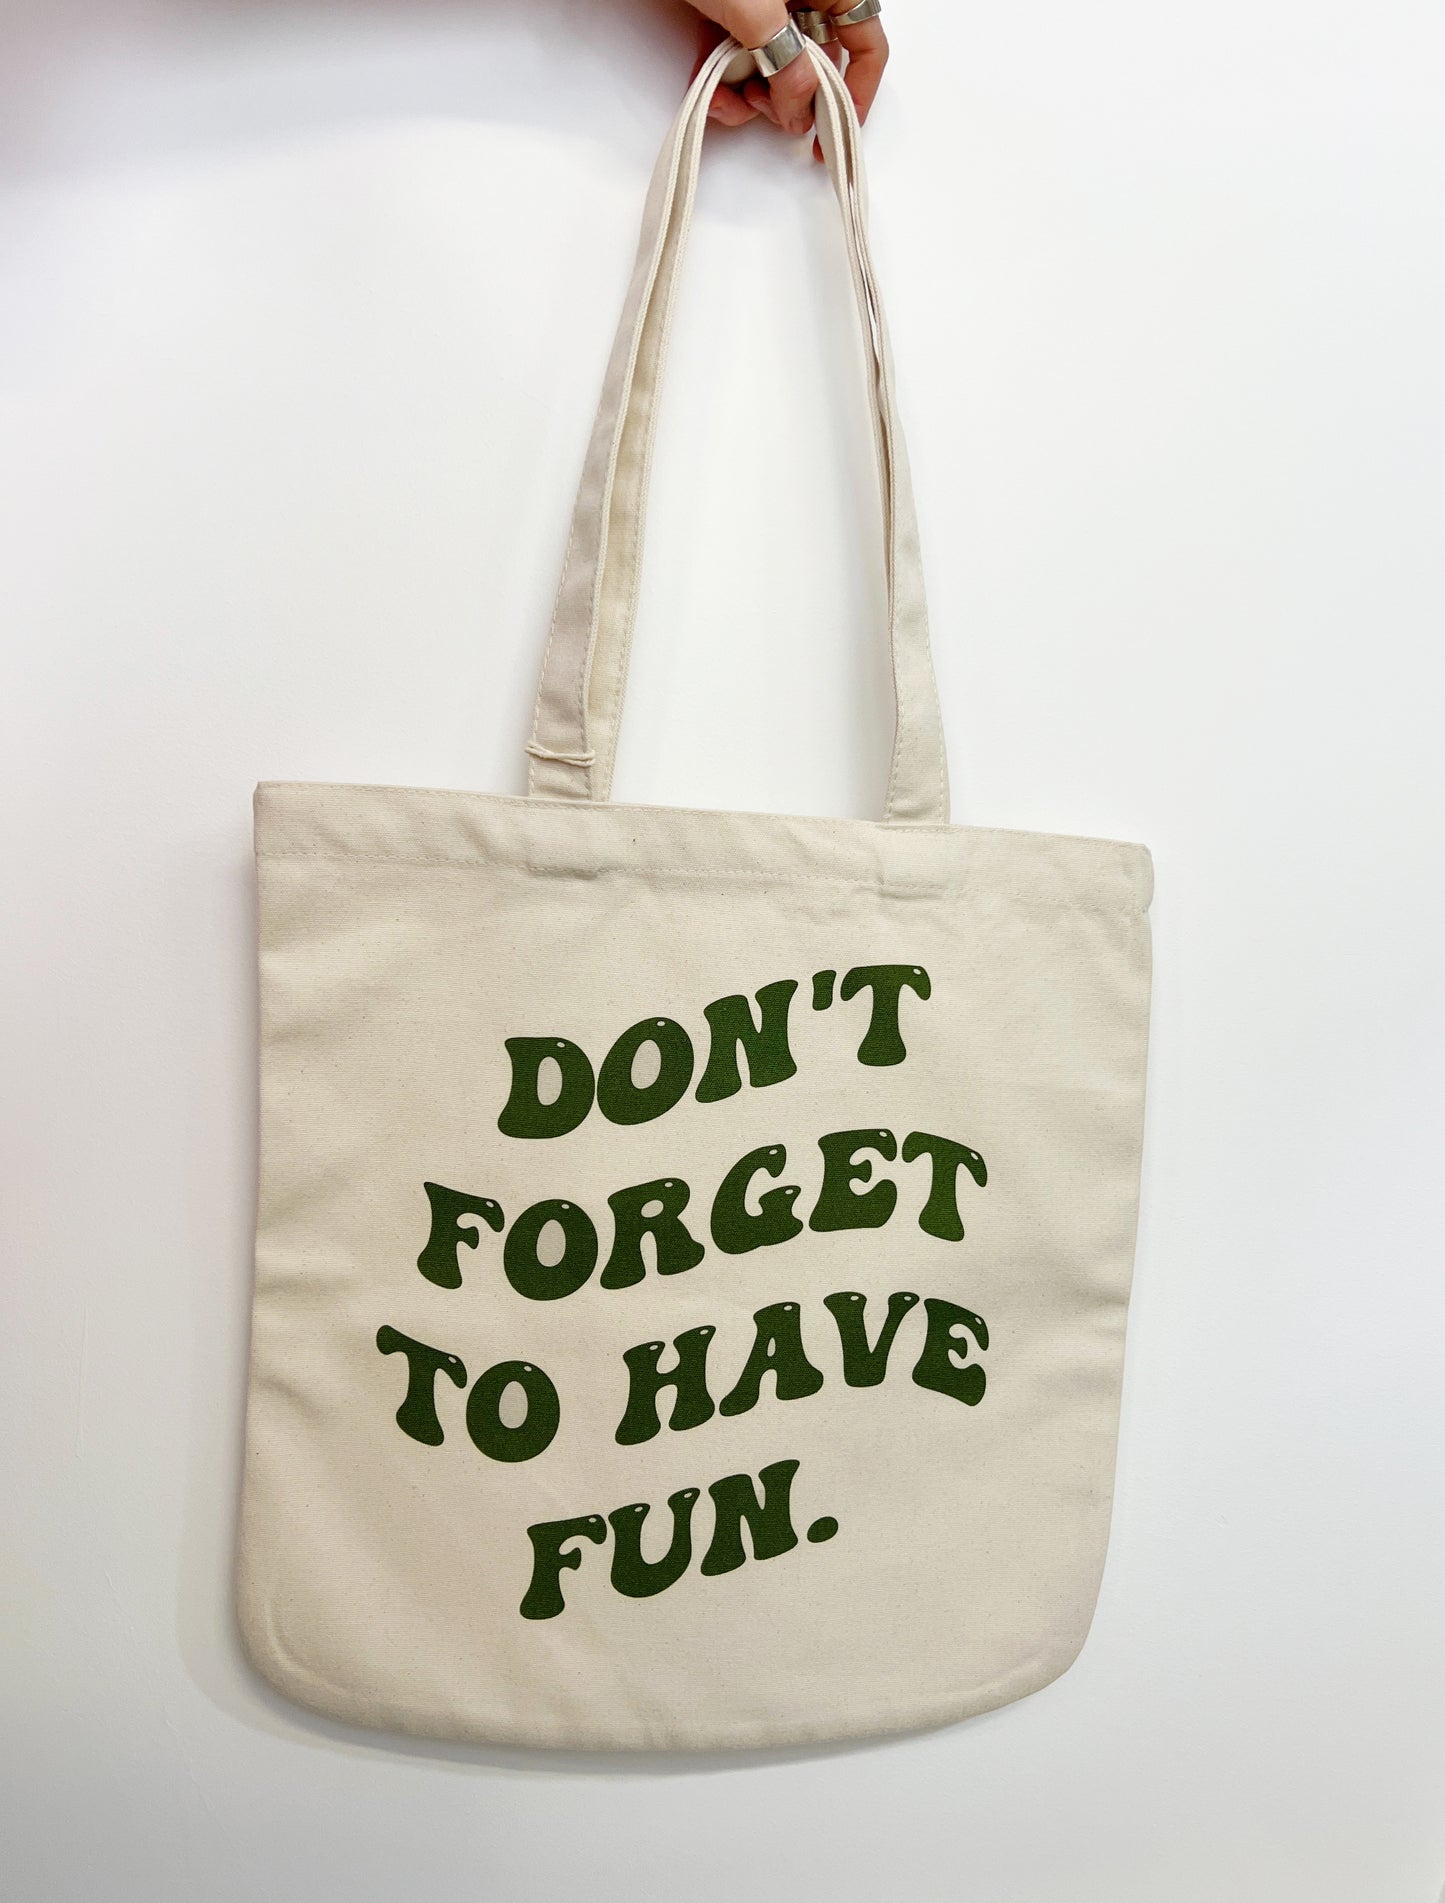 Don't forget to have fun- Tote bag